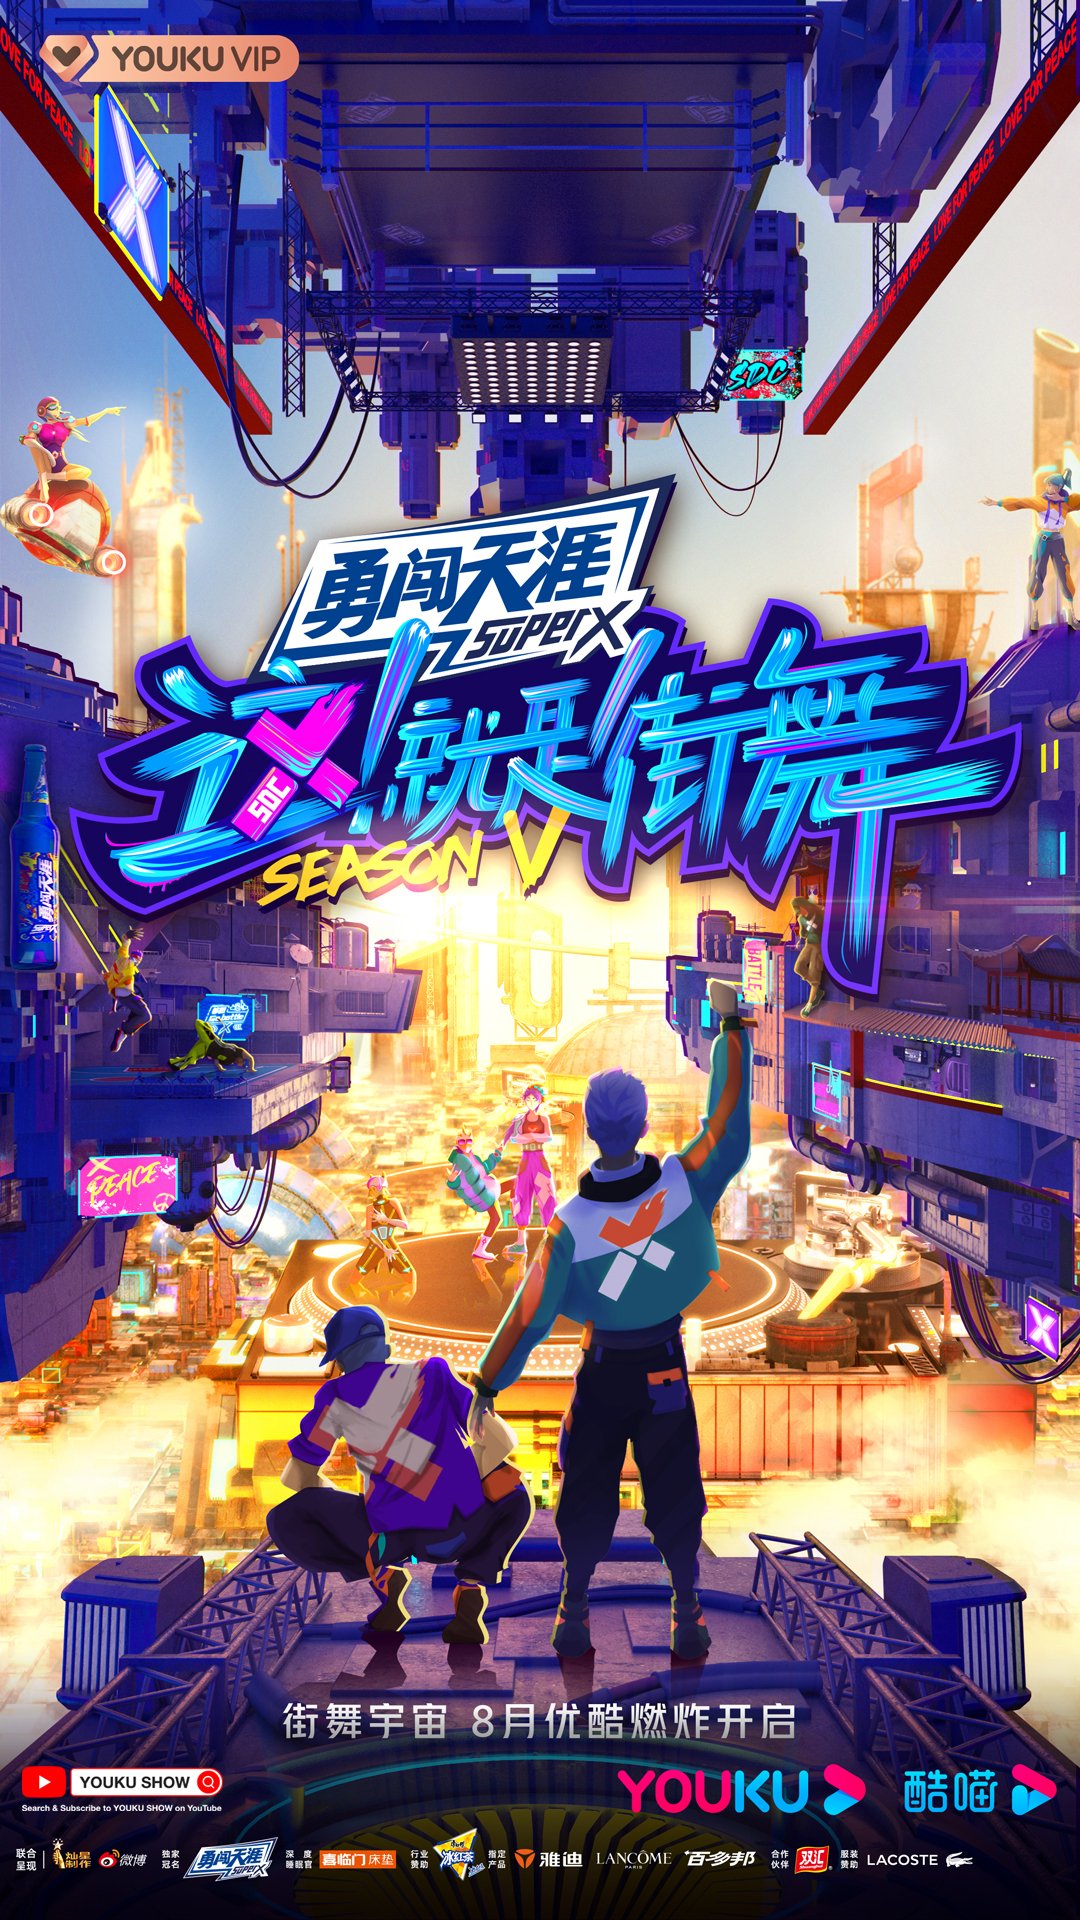 Street Dance of China is coming back with season 5